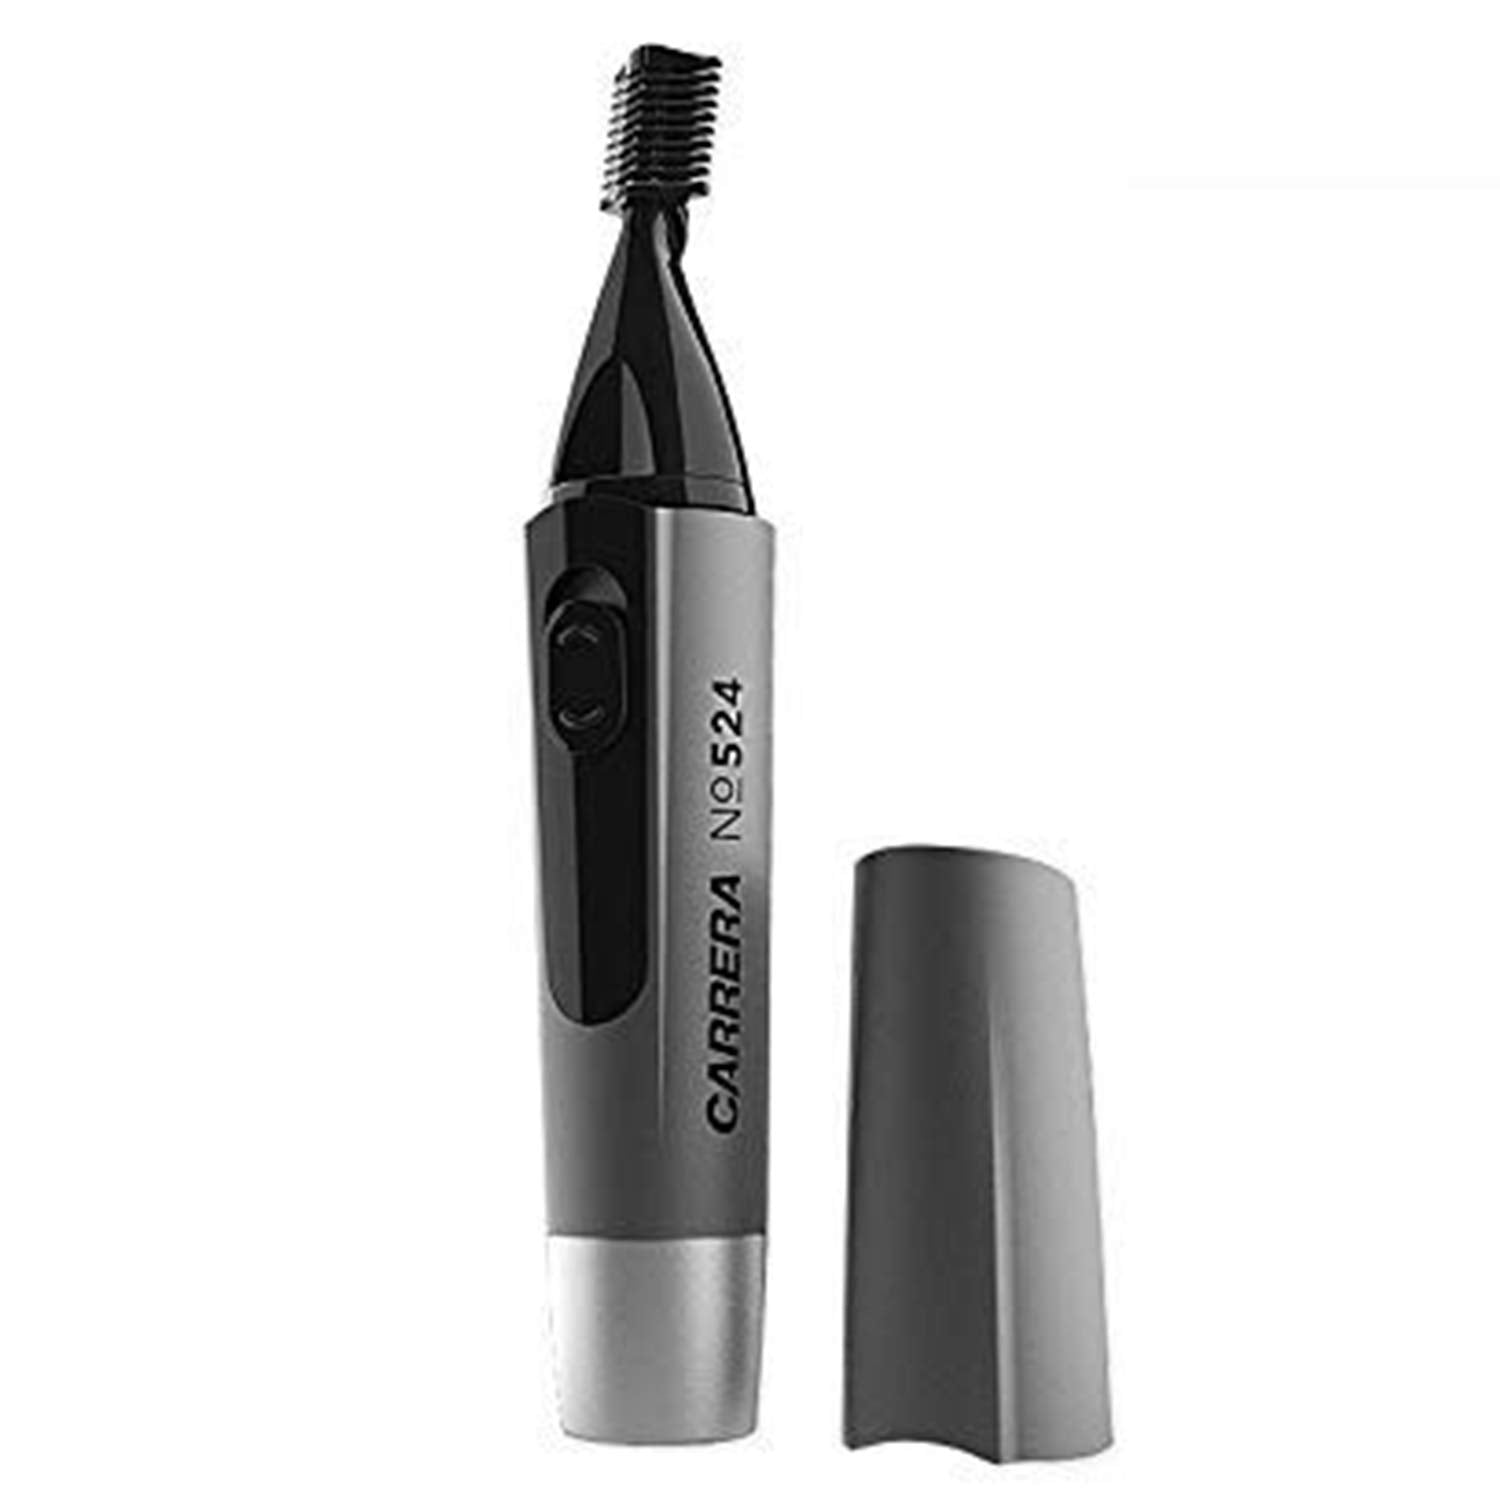 Carrera Ear and Nose Hair Trimmer at Best Price in Bahrain - Halabh